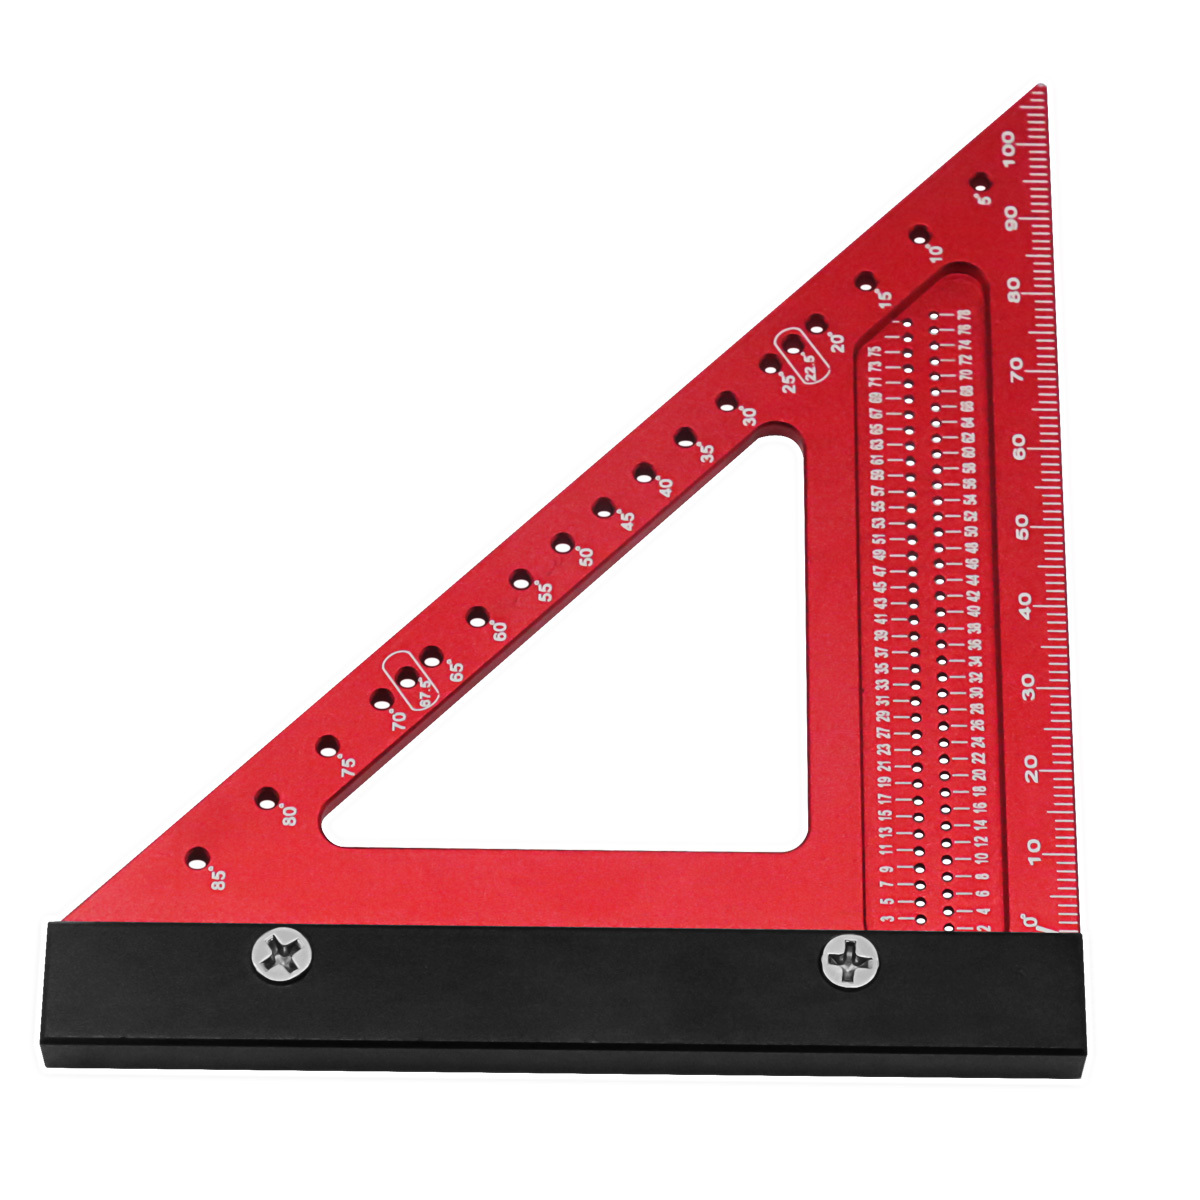 6 to 144 Straight Edge Rulers - Calibrated in Inches